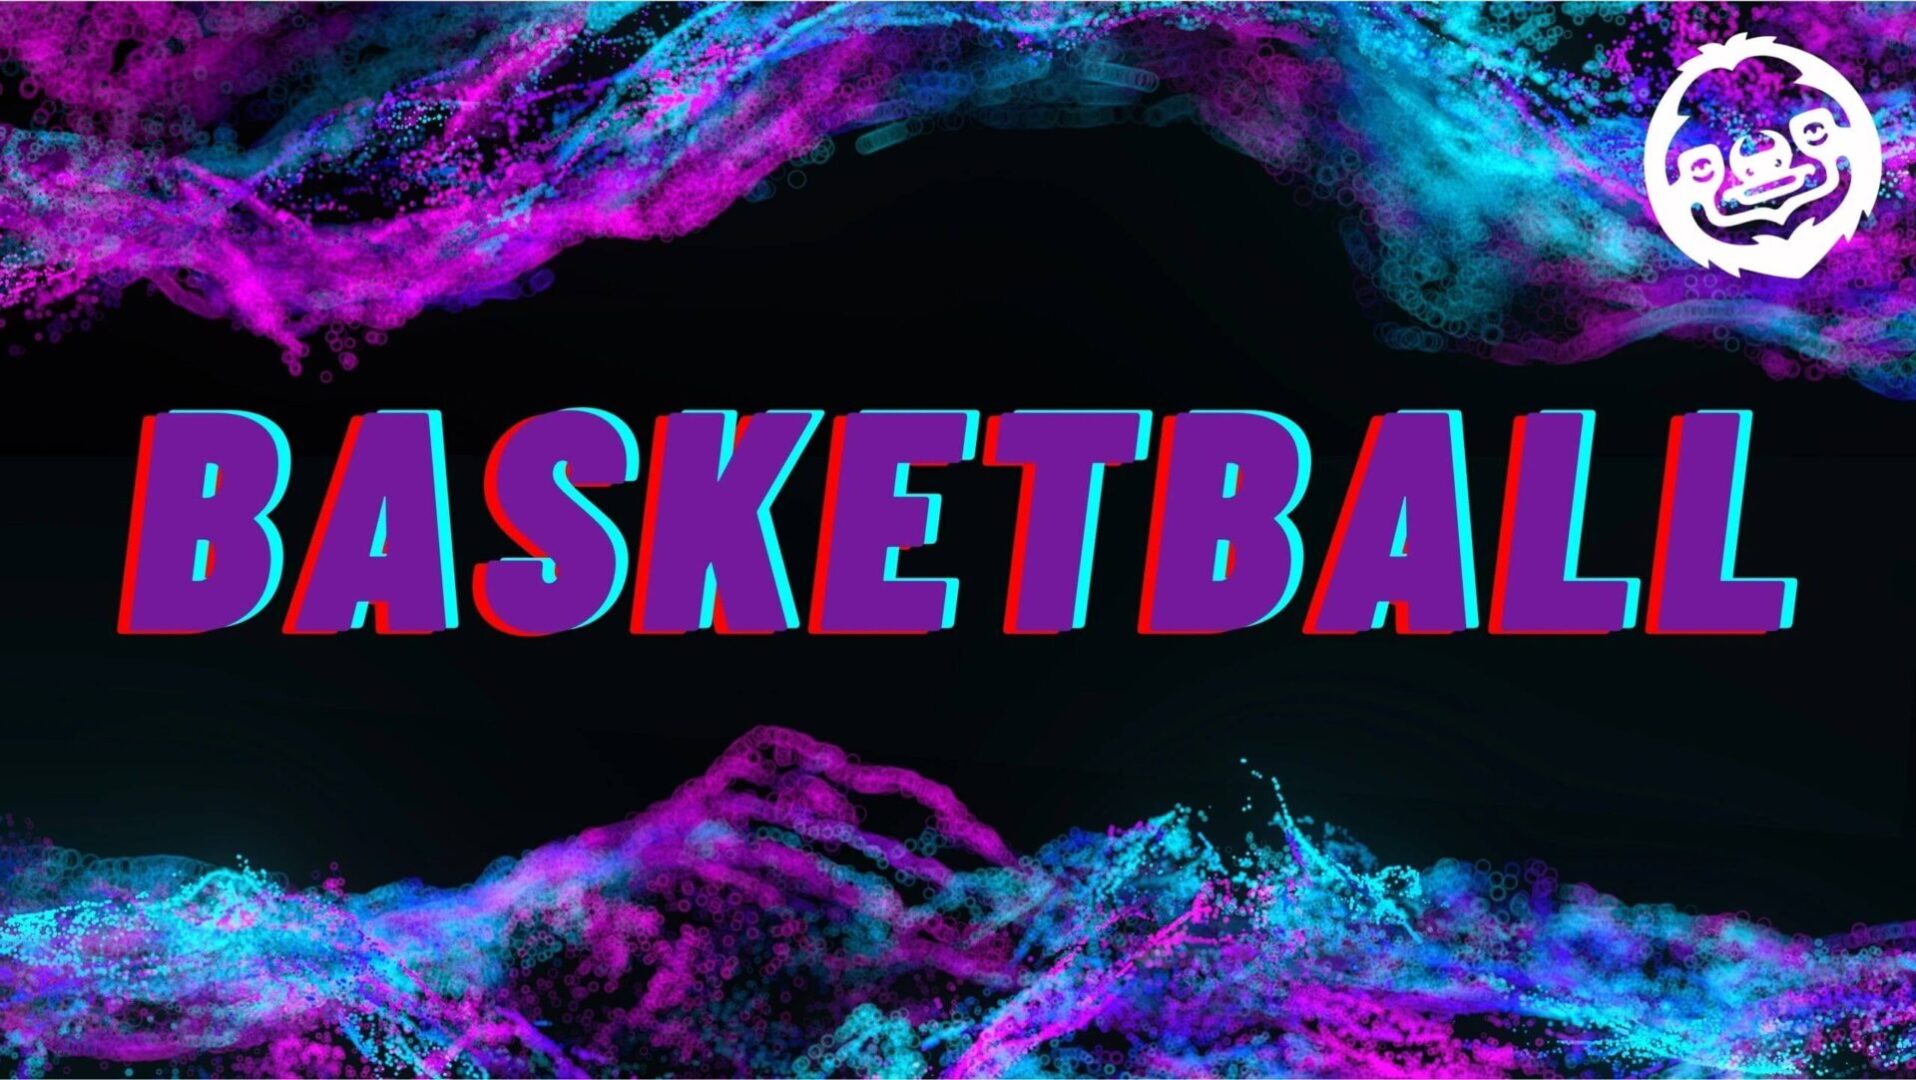 A neon sign that says basketball in front of some water.